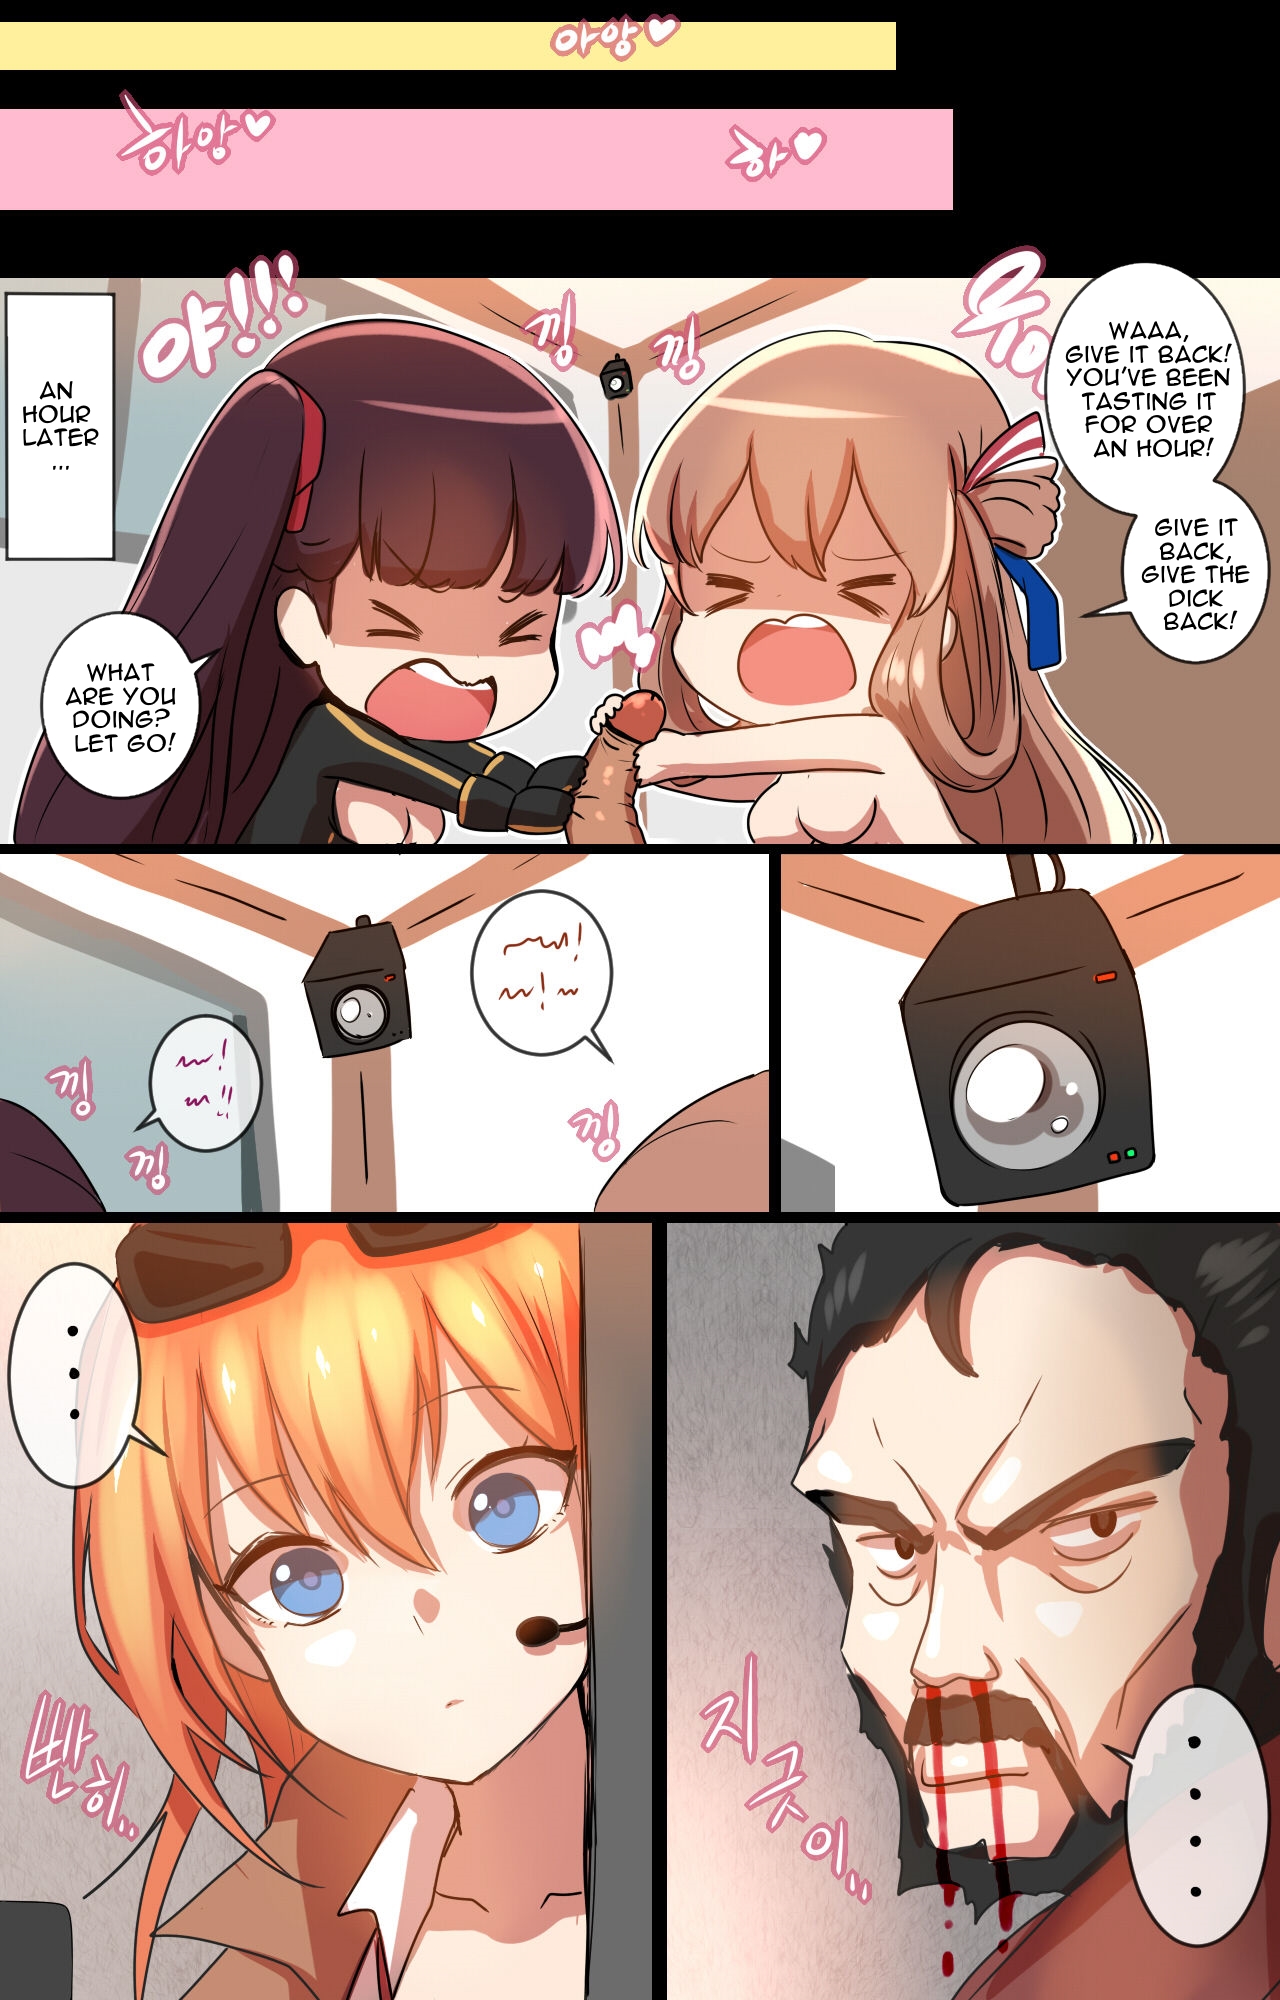 [yun-uyeon (ooyun)] How to use dolls 02 (Girls Frontline) [English] page 14 full